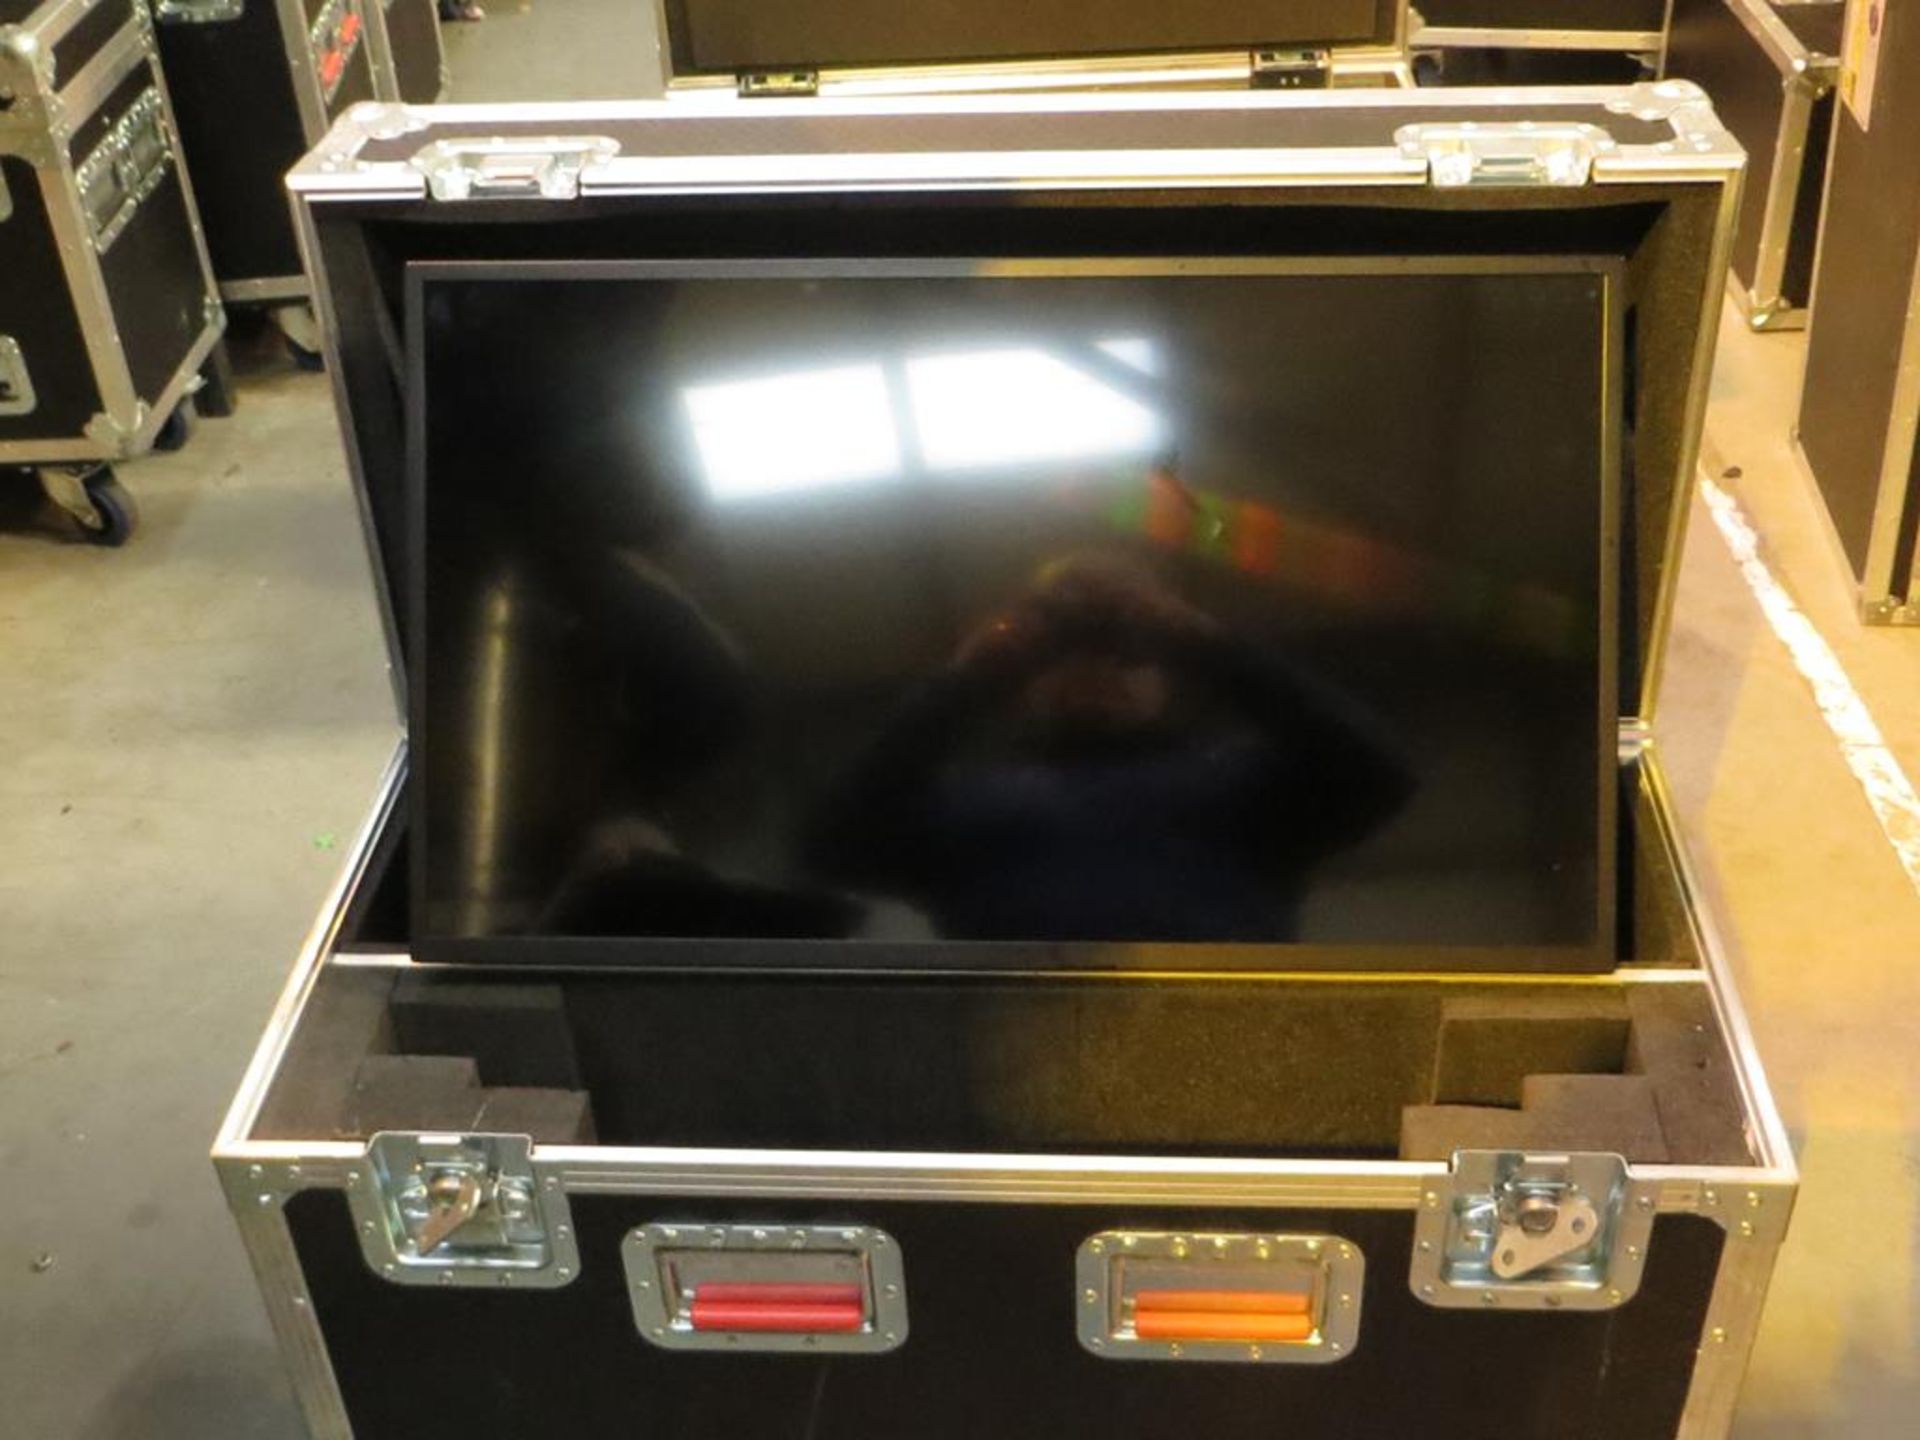 Panasonic, 32" LED monitor, Model TH320F1E with remote control and wall mount in transit case: - Image 2 of 3